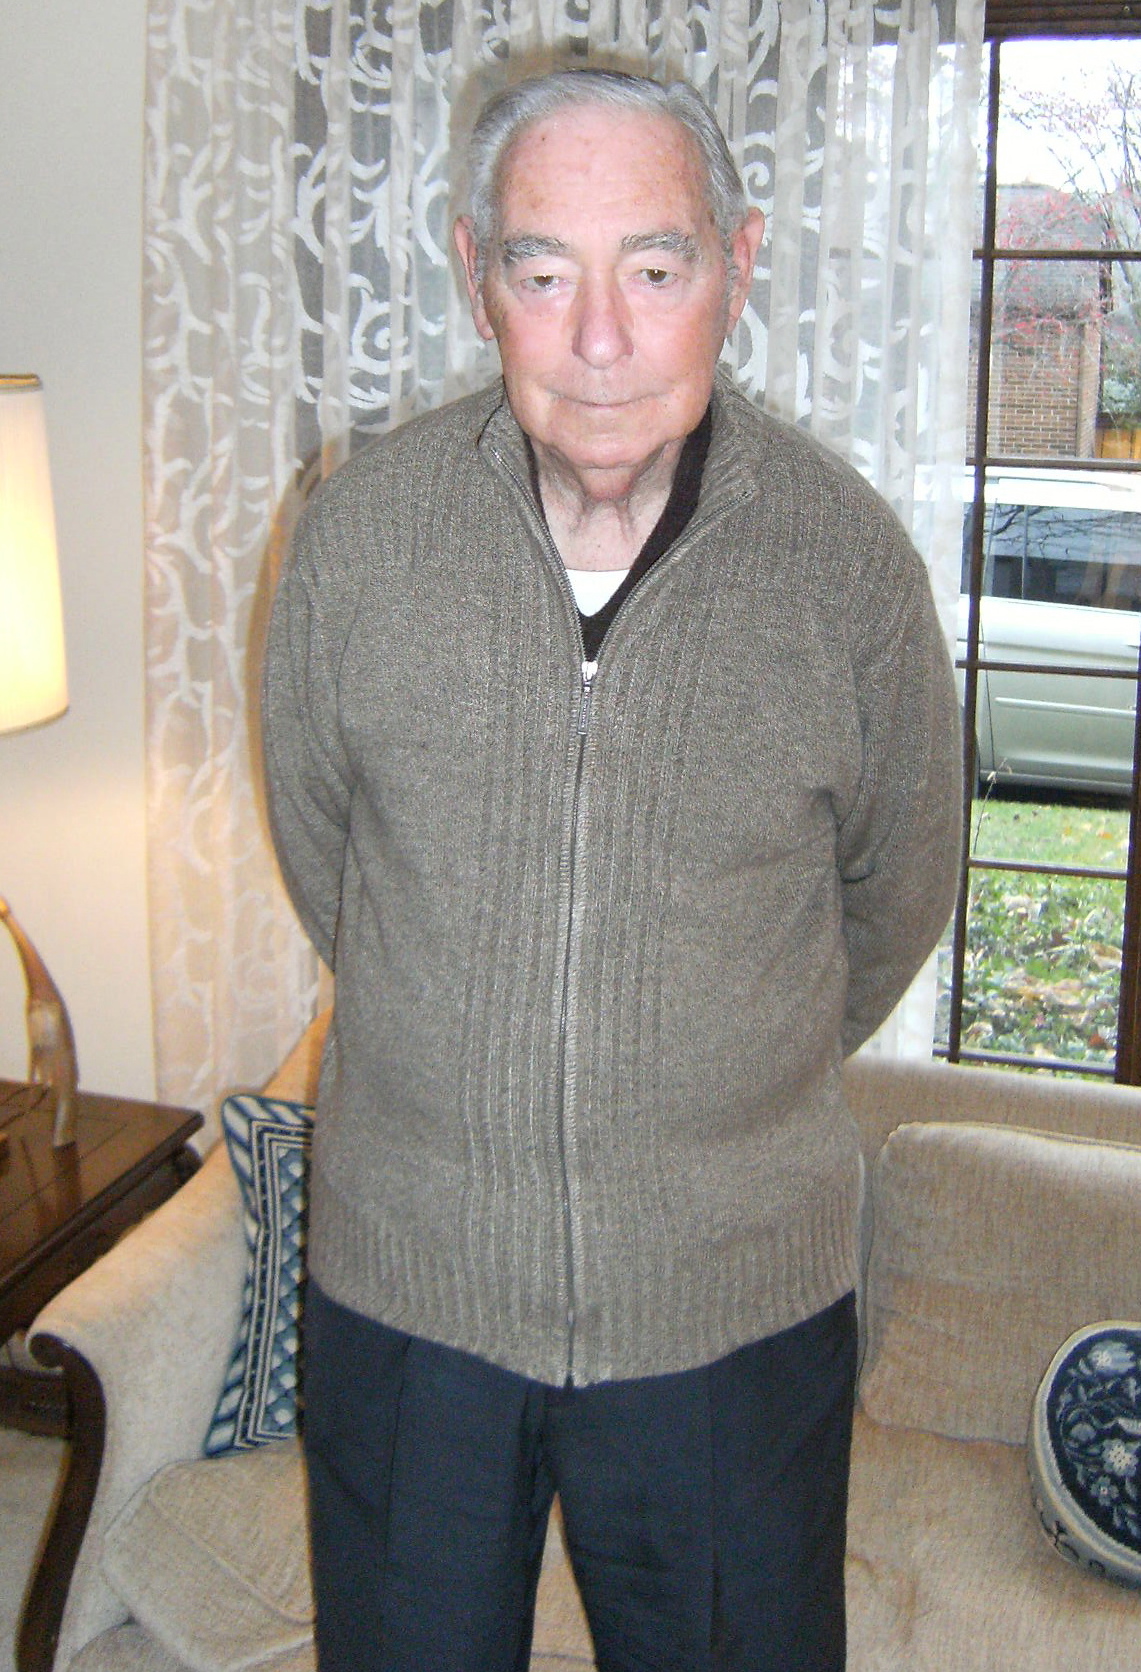 Mr. Norman Feuer pictured at his home in Columbus, Ohio on December 9, 2009